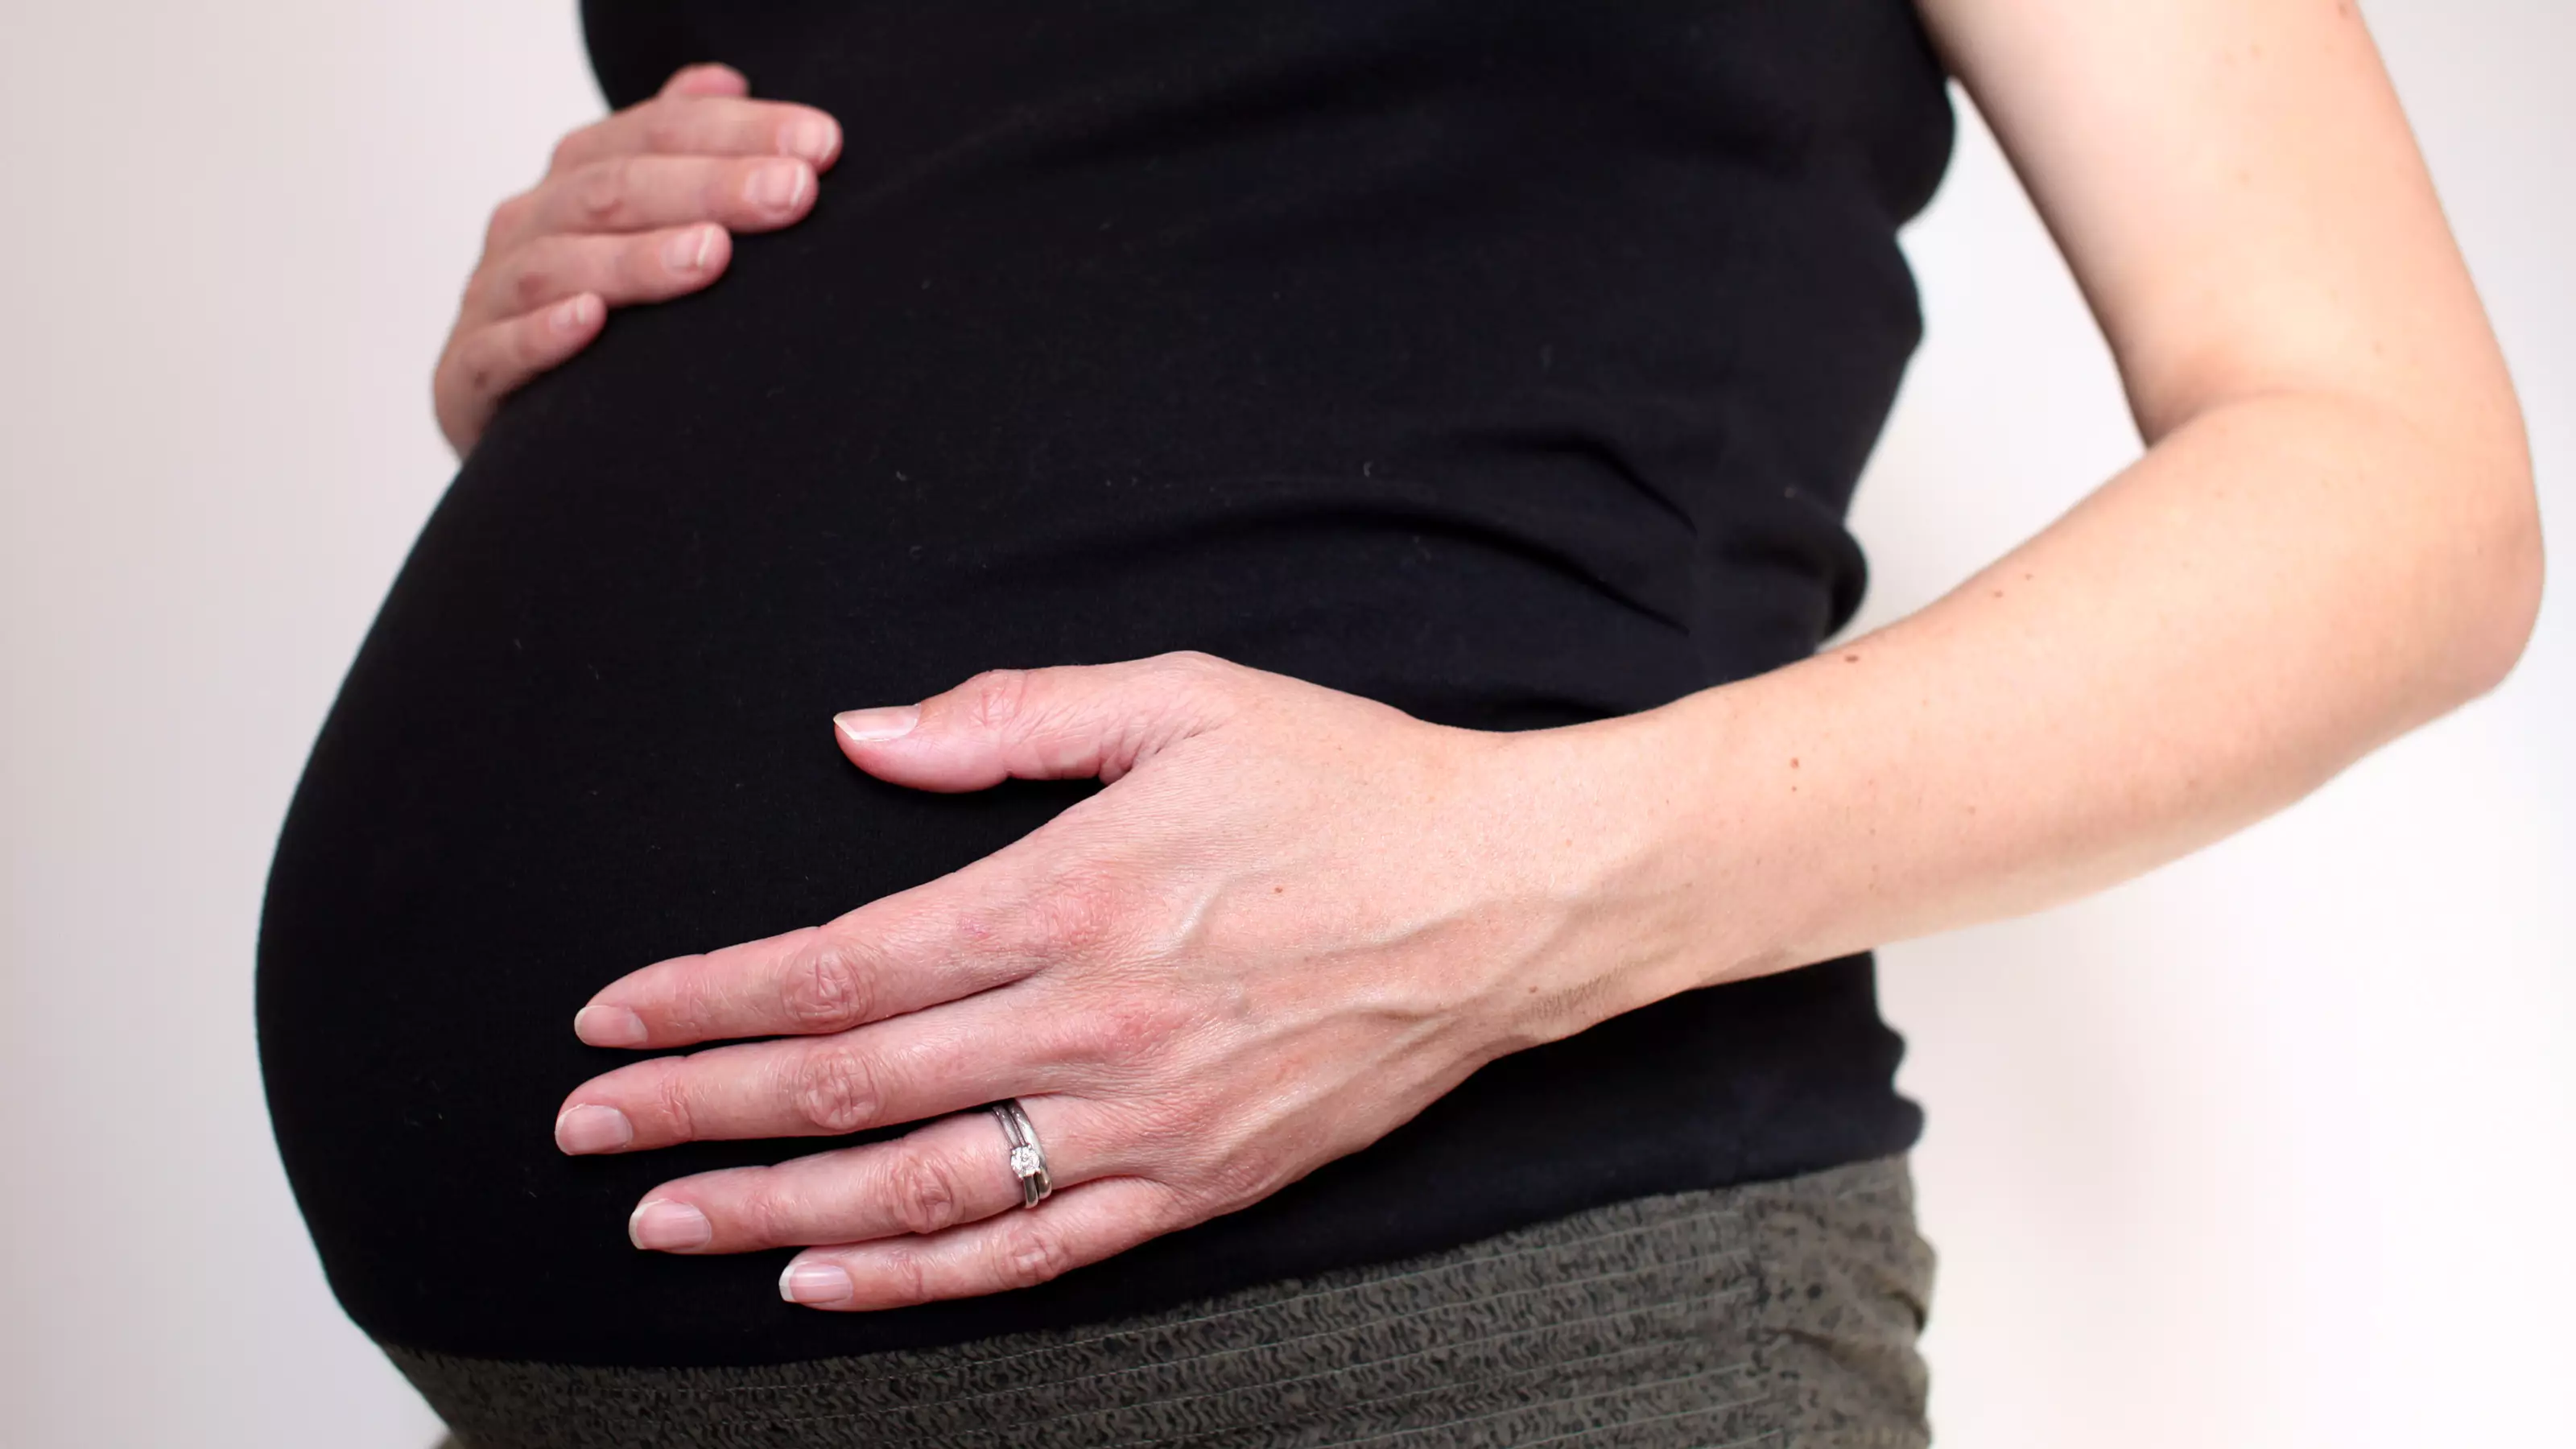 Womb Transplants Could Allow Transgender Woman The Chance To Have Babies 